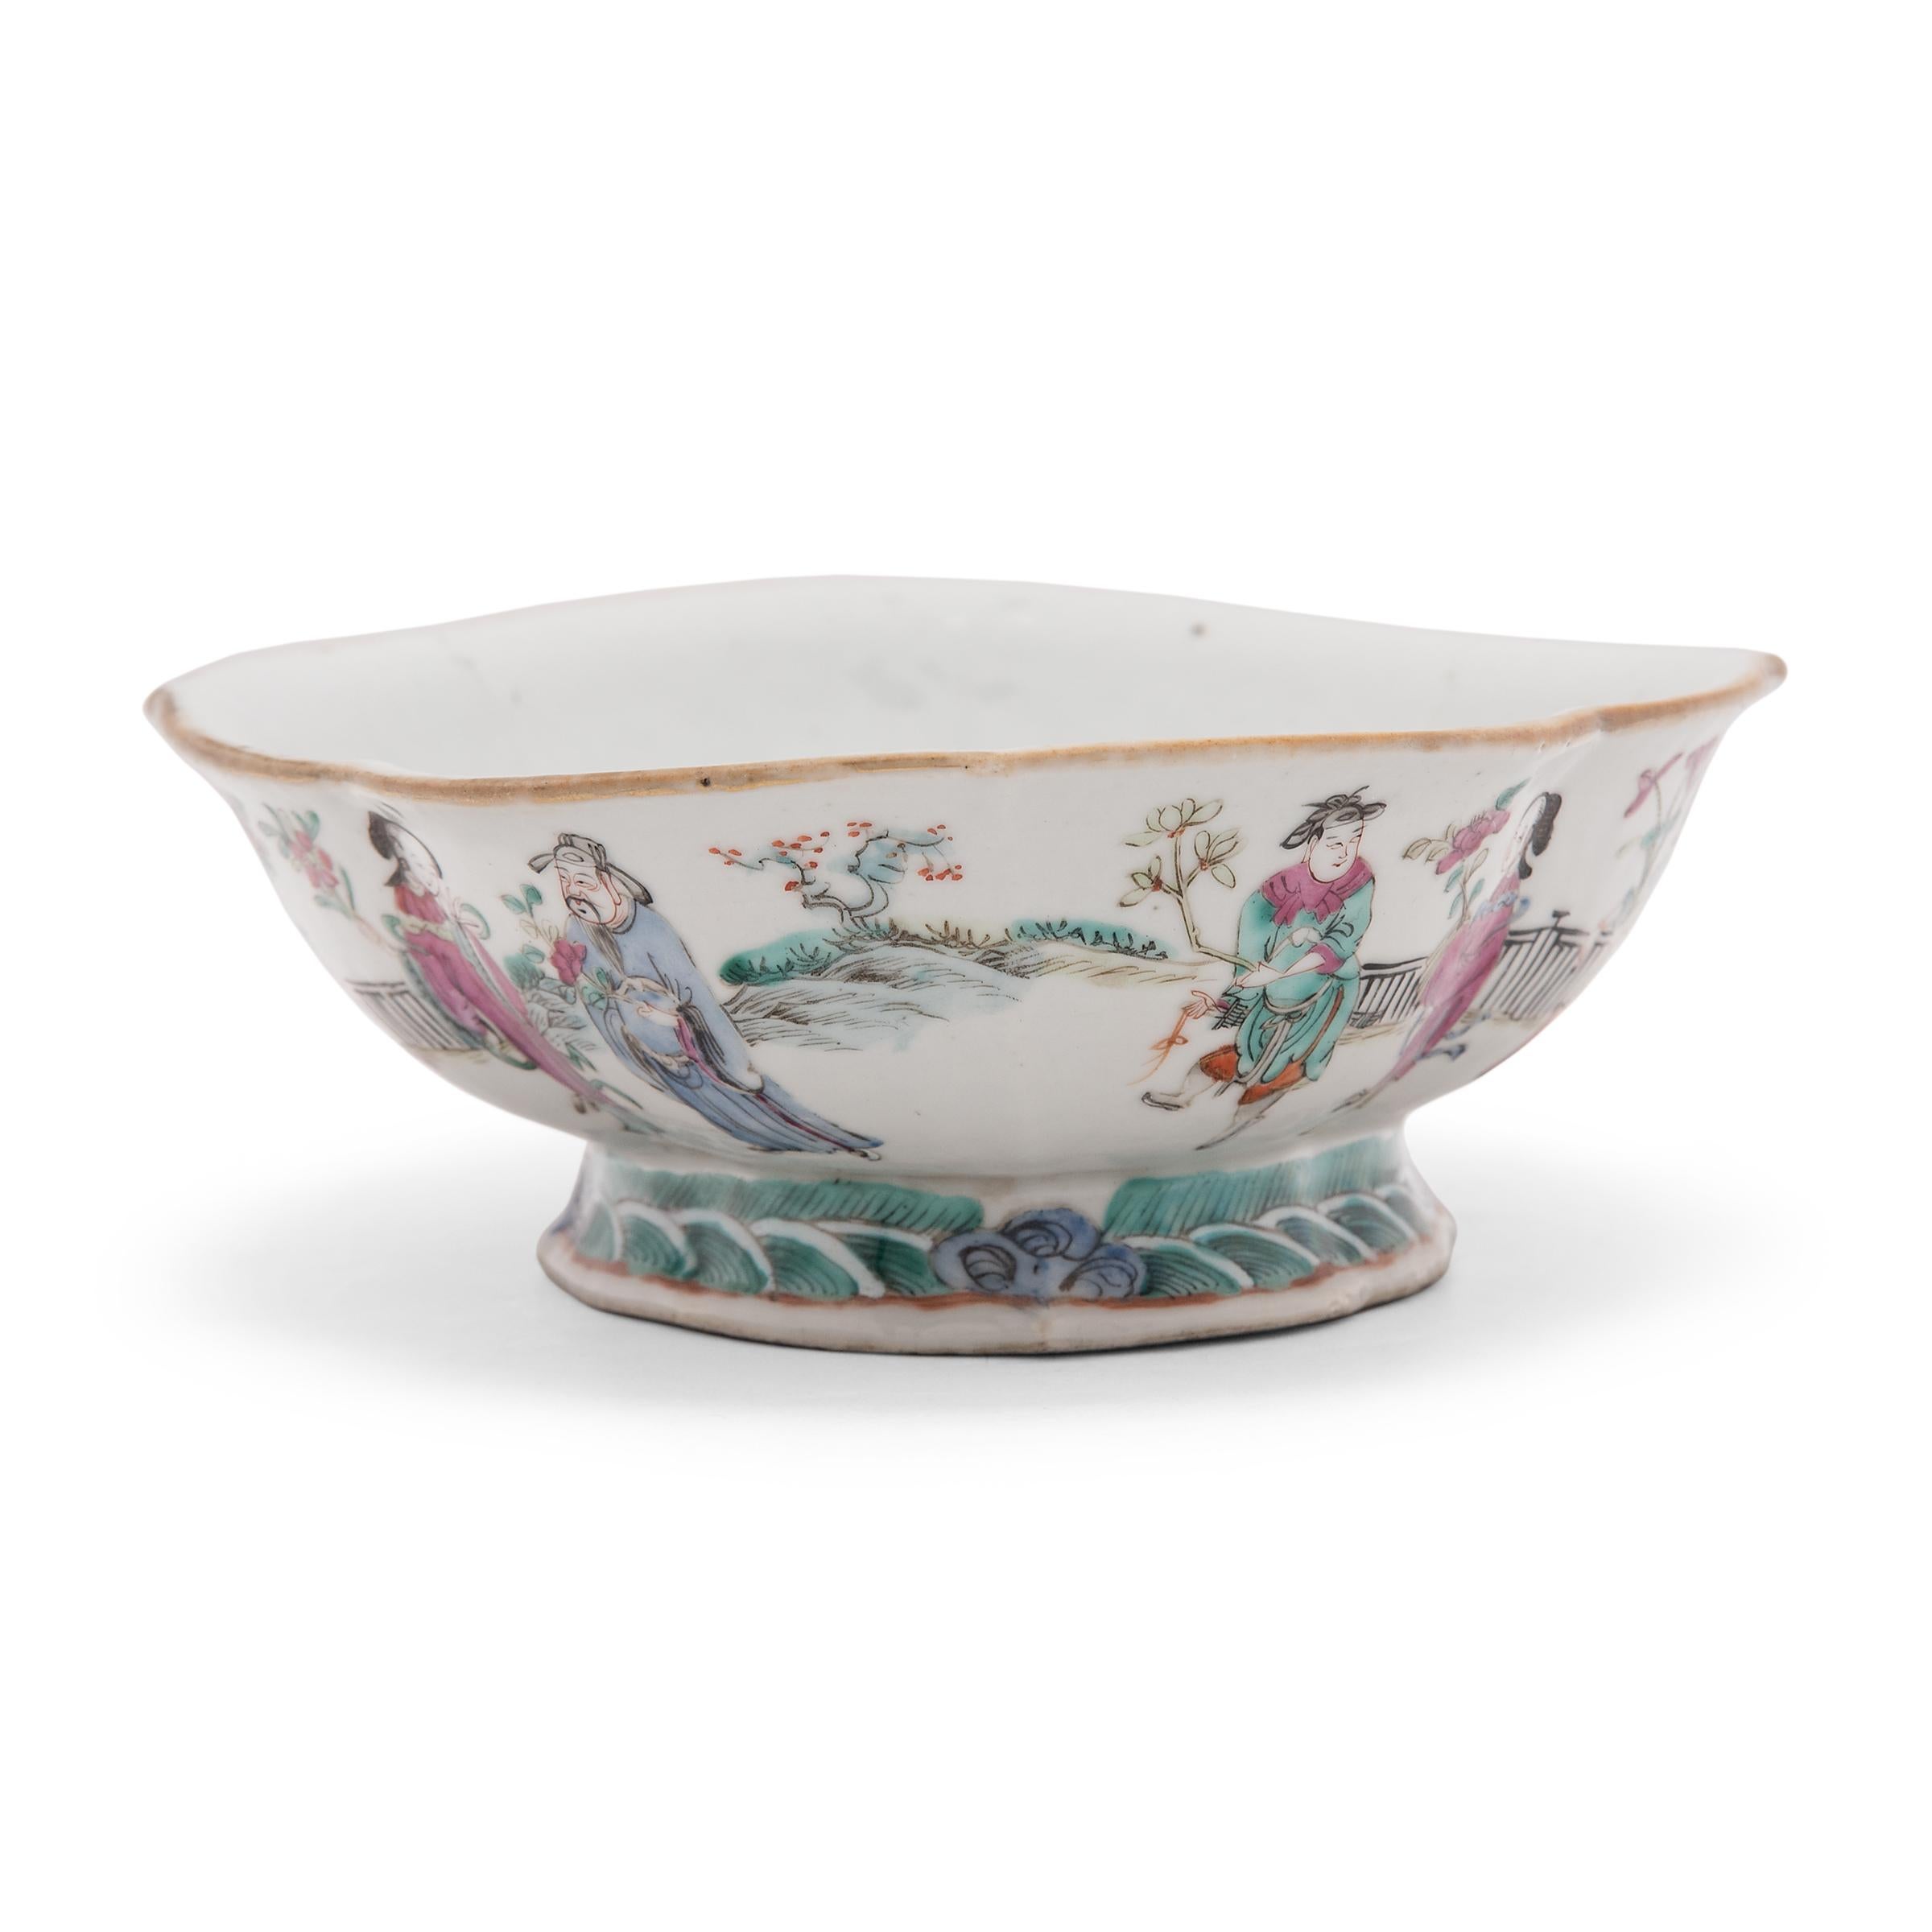 Enameled Chinese Famille Rose Footed Offering Bowl, c. 1850